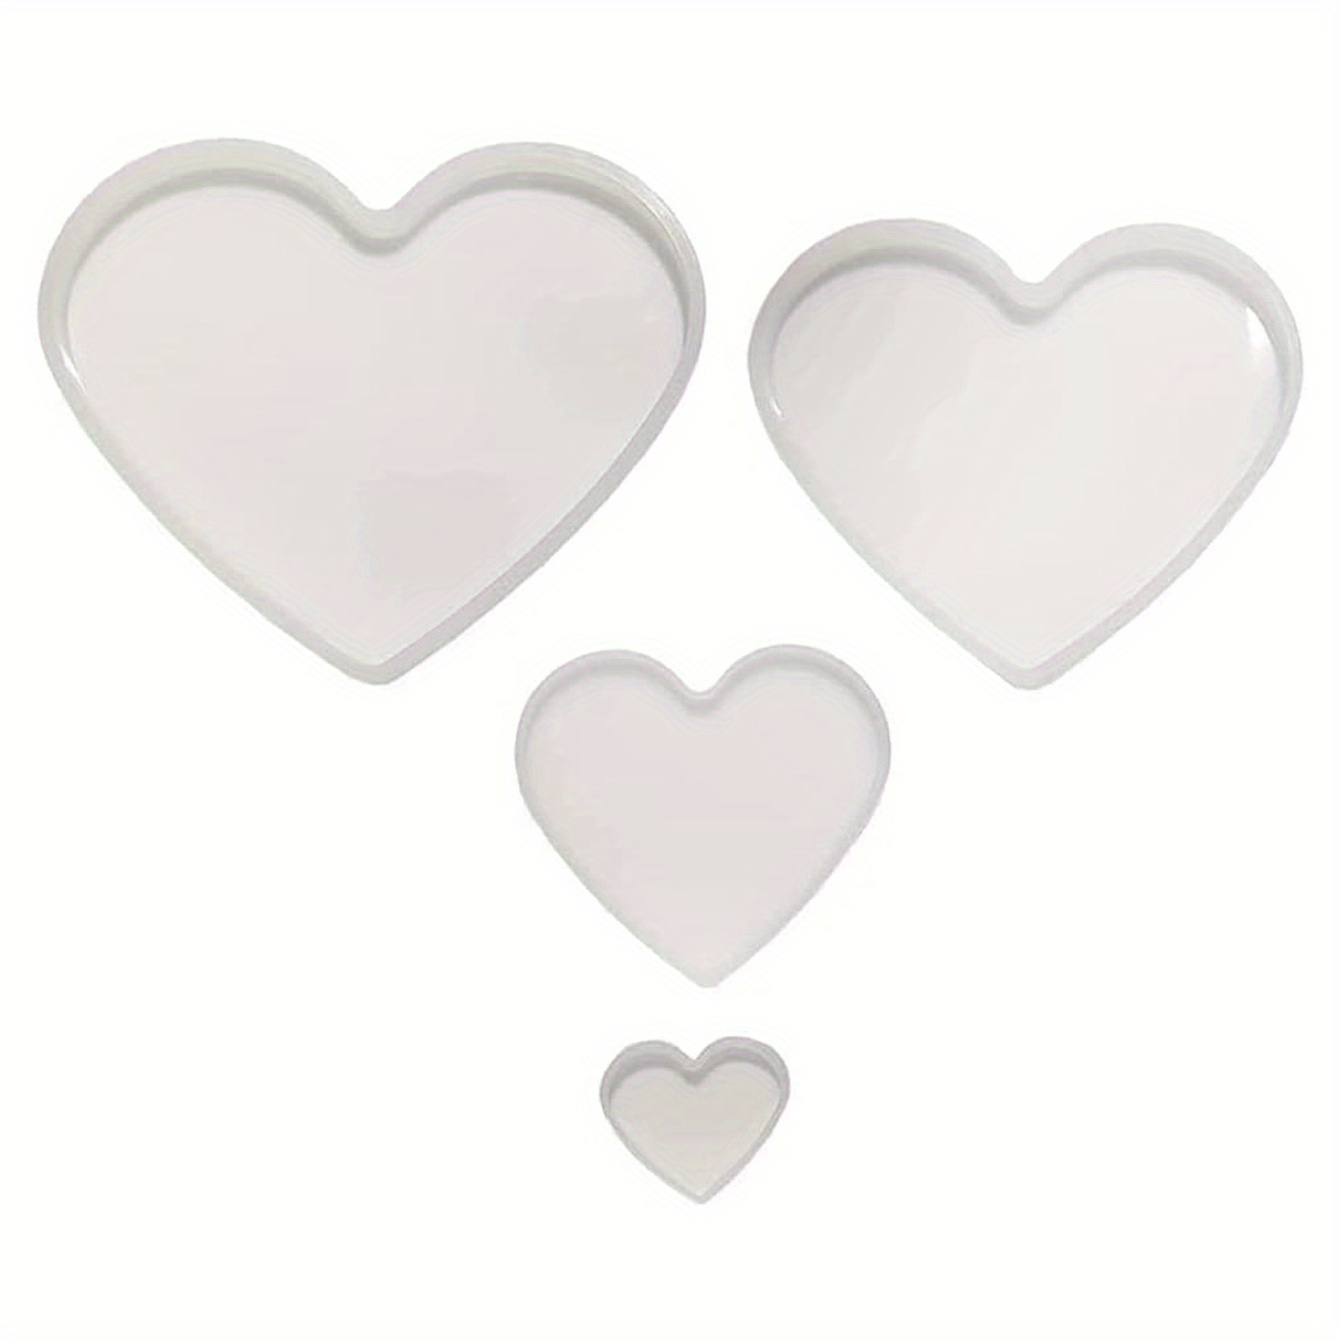 LVDGE 3D Heart-Shaped Silicone Clear Mold for Valentine Epoxy Resin Art,  DIY Candle & Soap Making, Aromatherapy Product (4 Pack White)